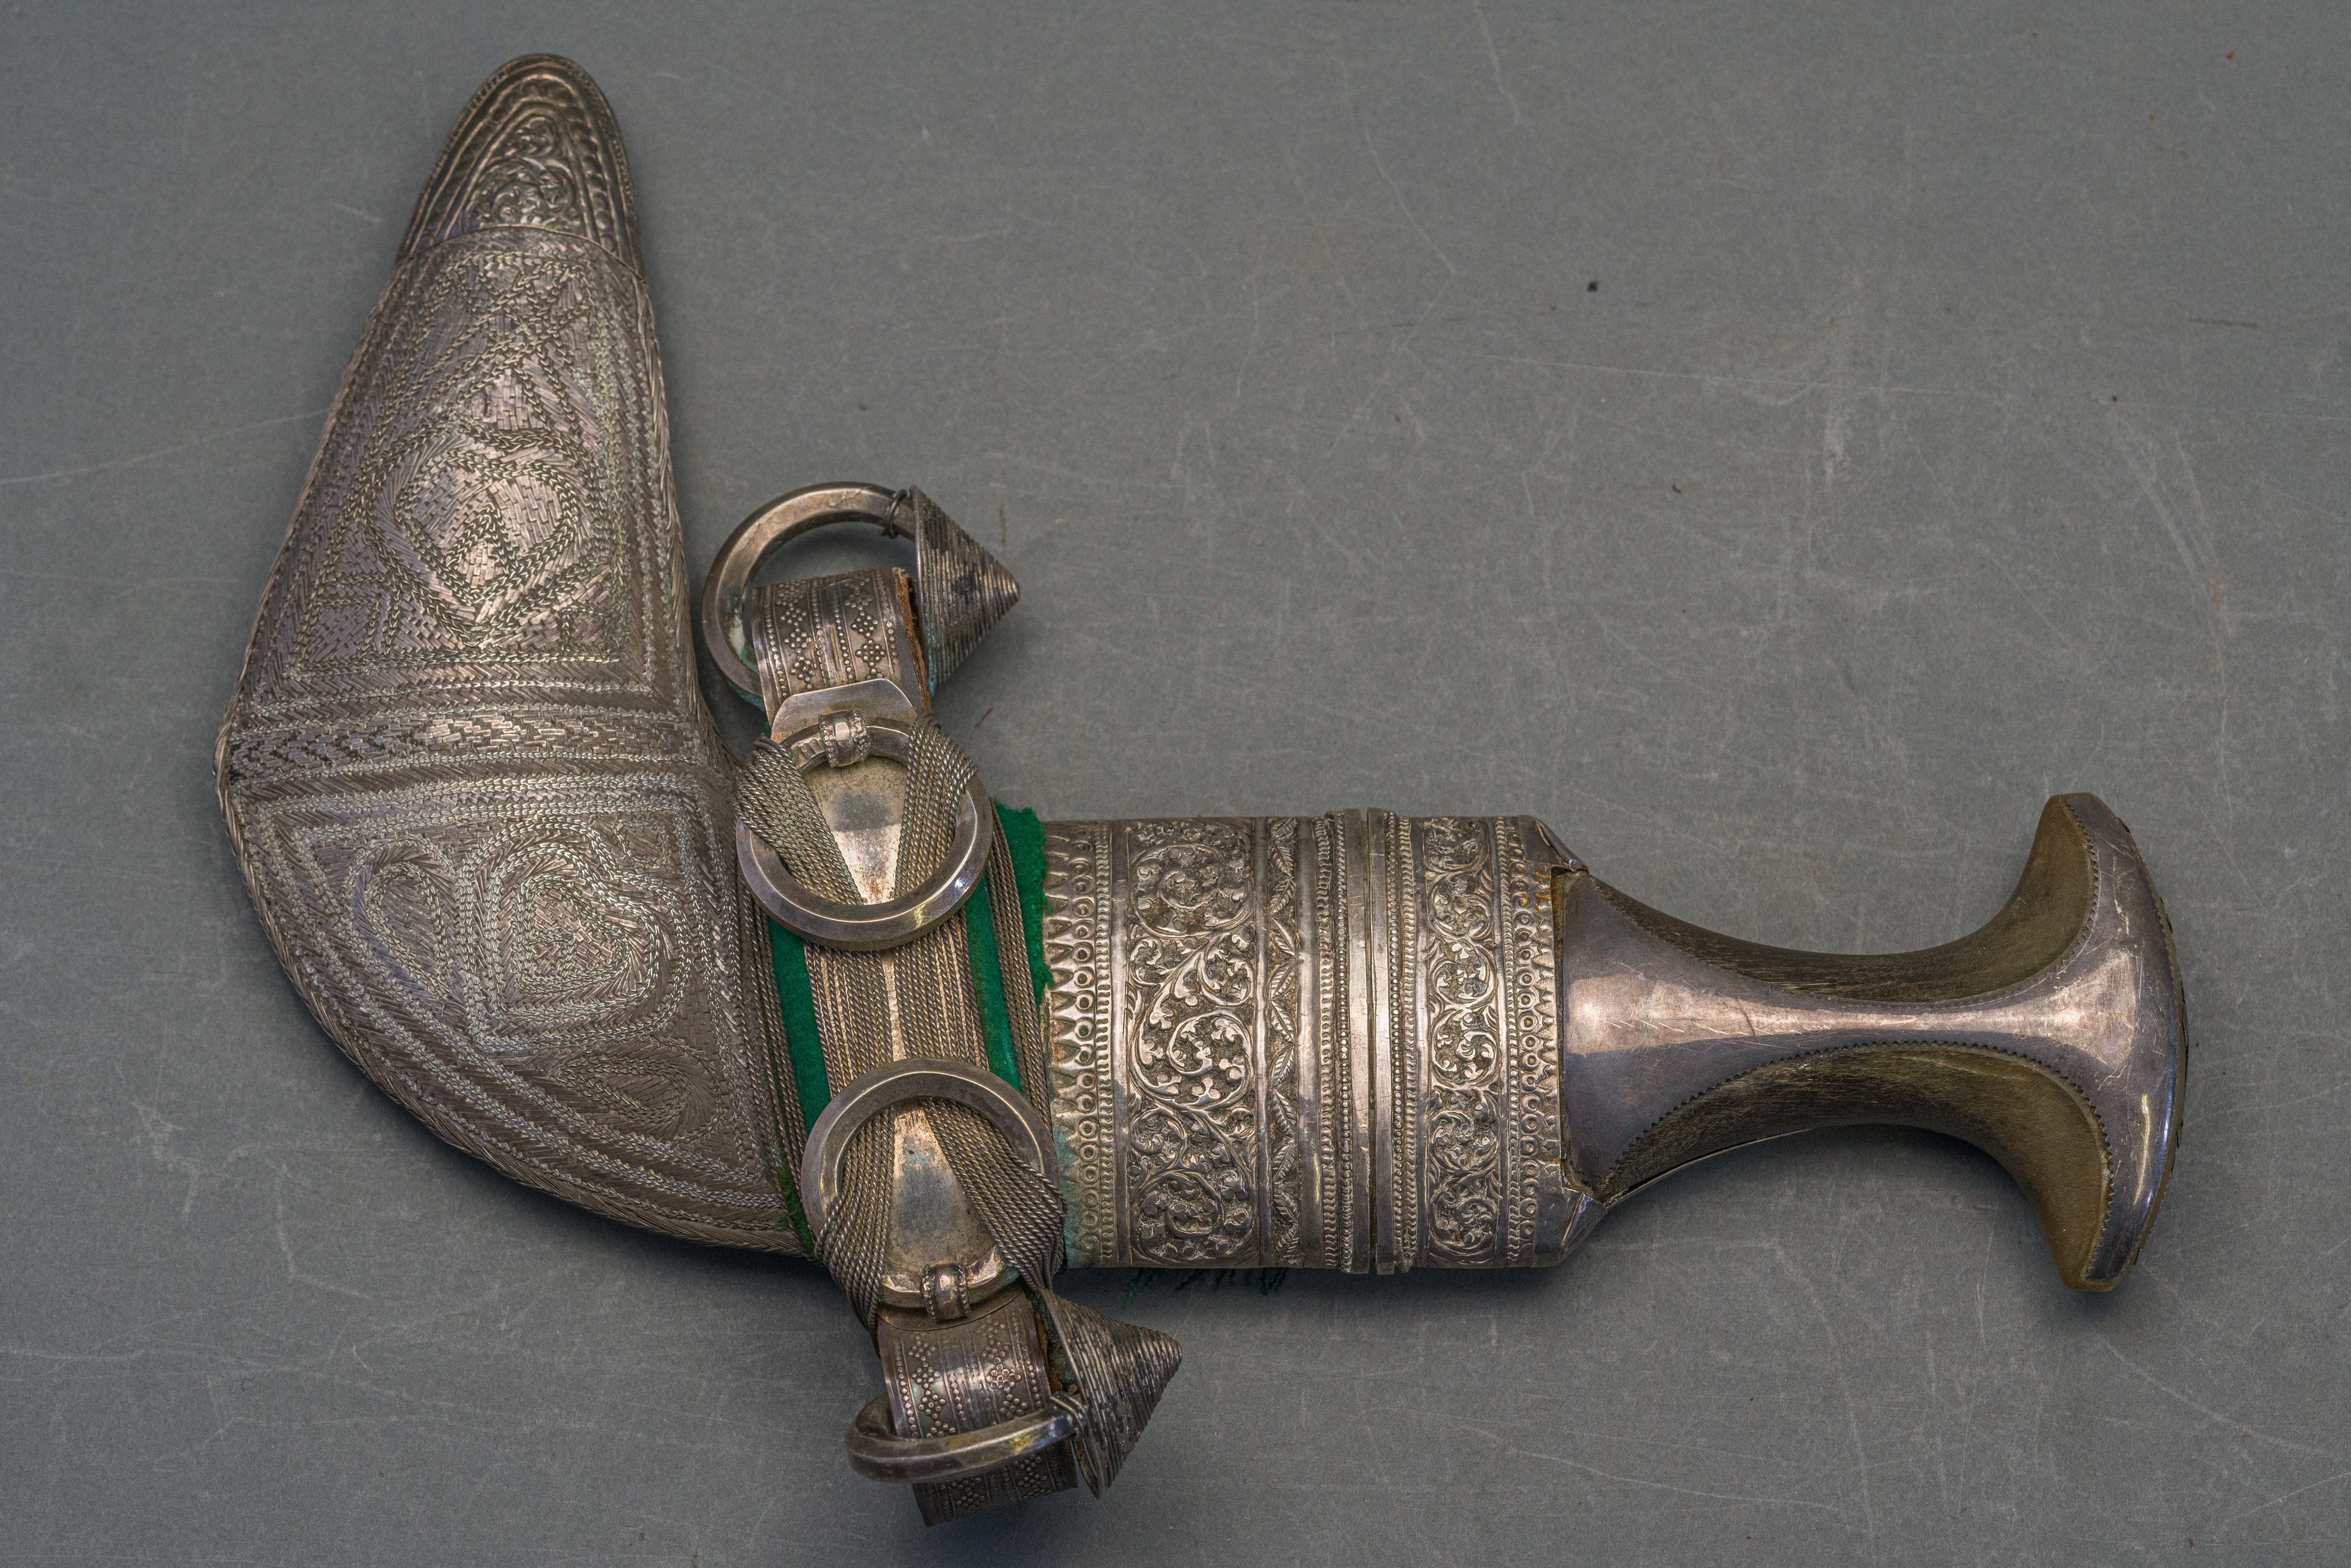 AN ARAB DAGGER (JAMBIYA) WITH SILVER-MOUNTED HILT, EARLY 20TH CENTURY - Image 2 of 10